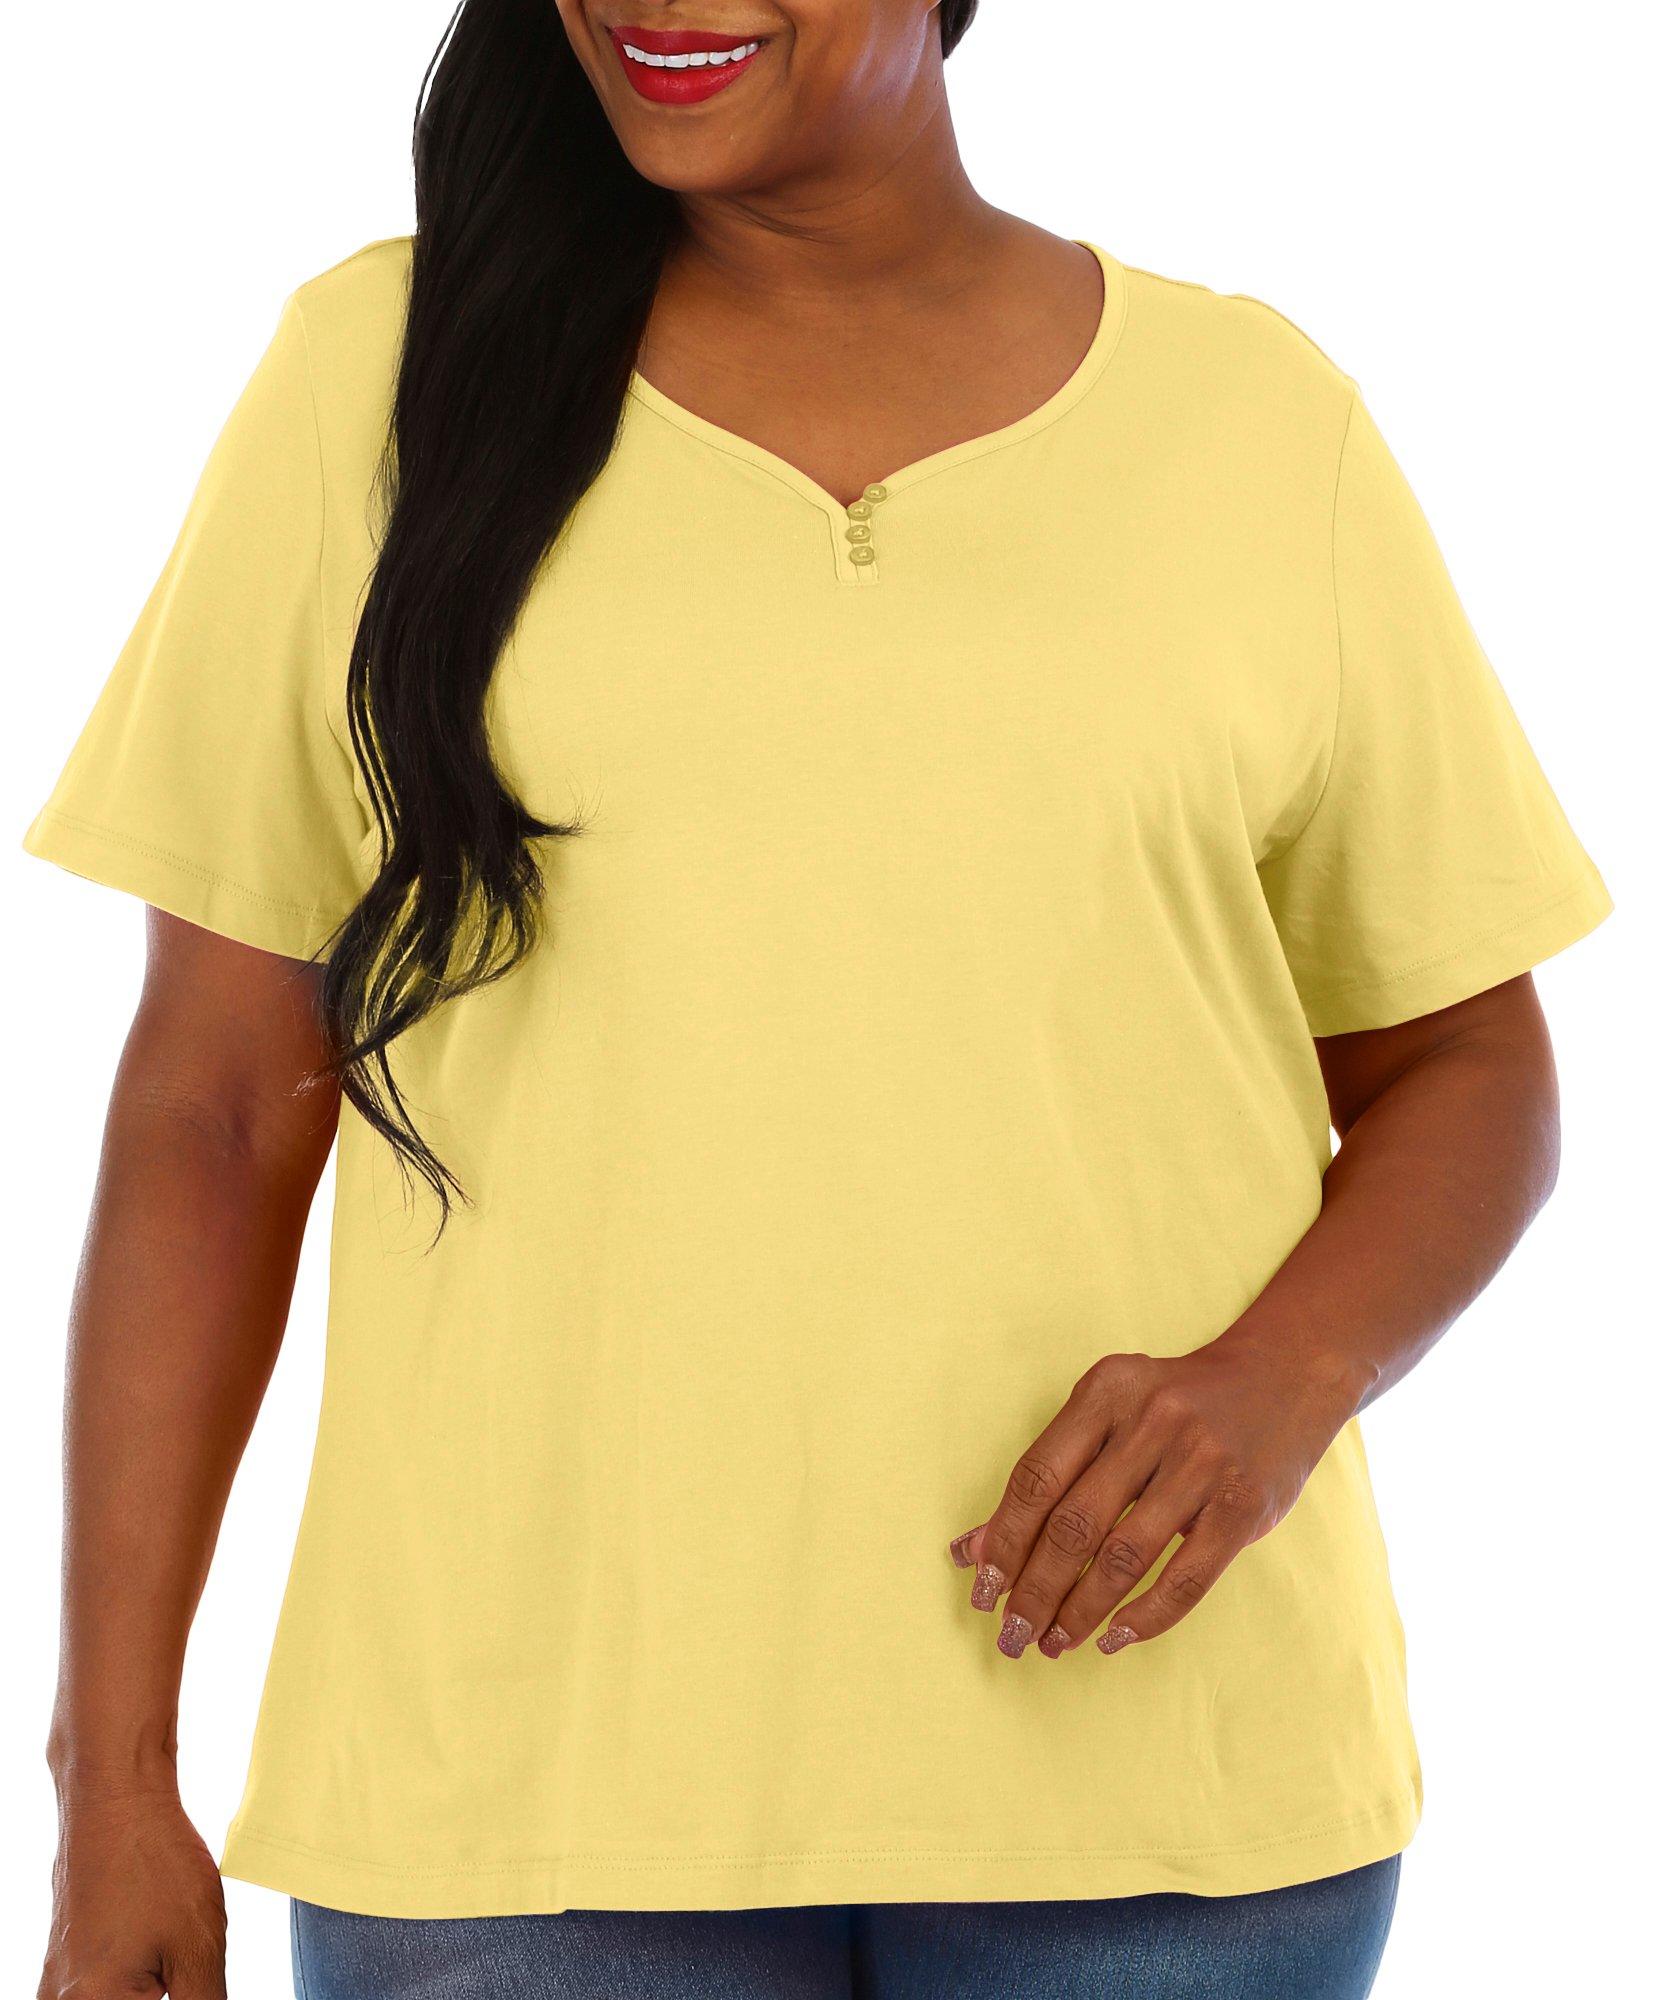 Coral Bay Plus Solid Short Sleeve Henley Top